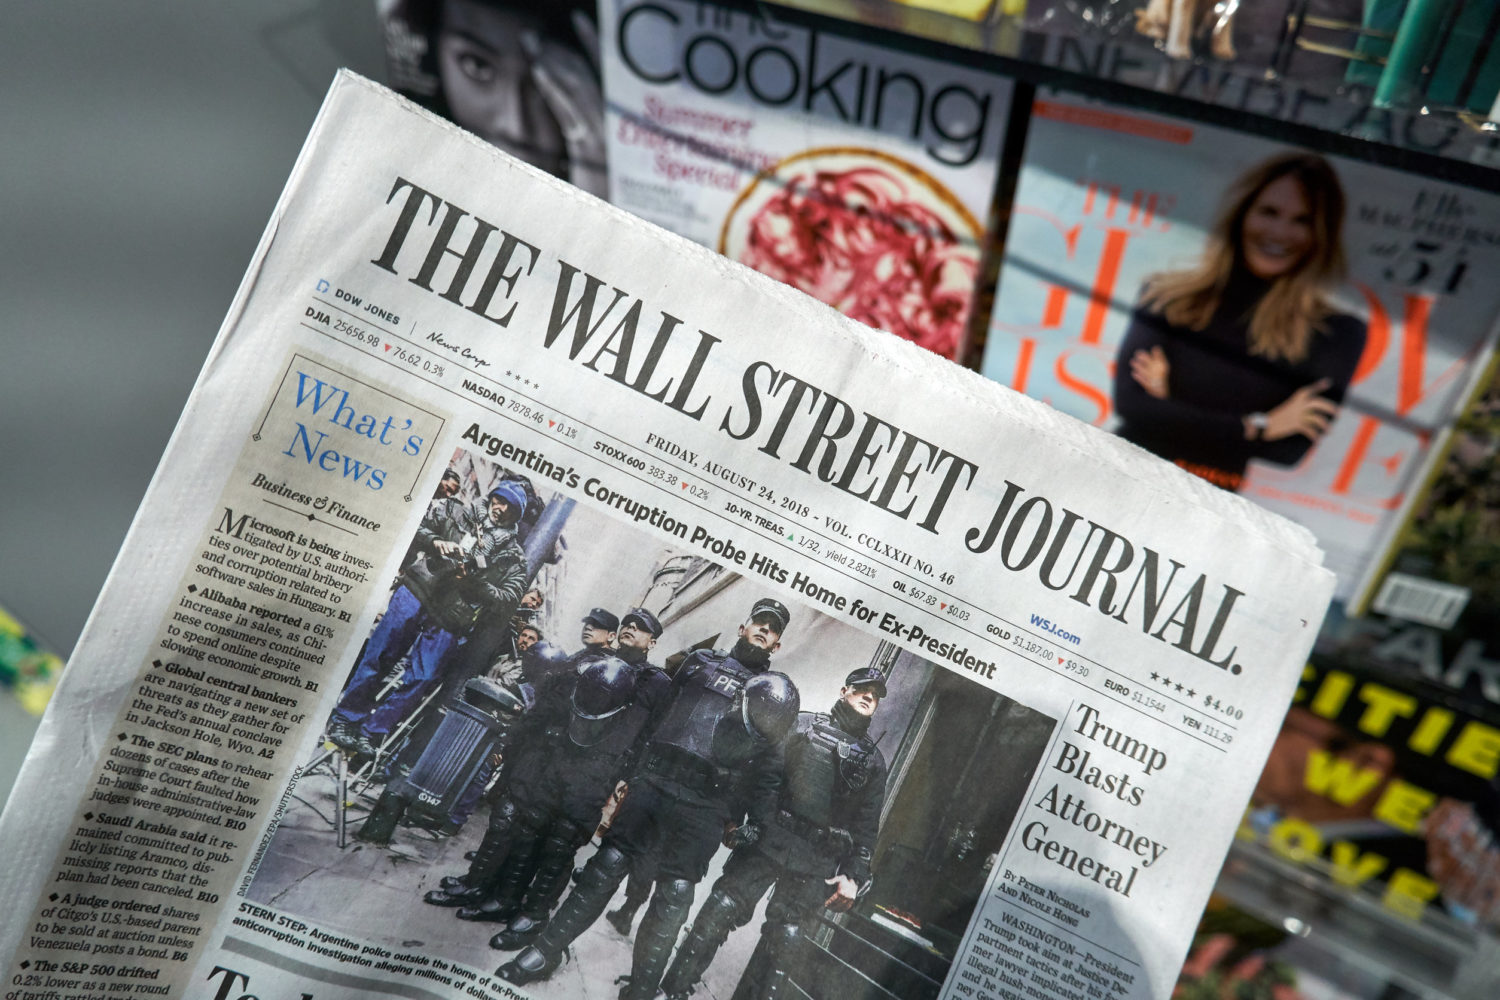 The Wall Street Journal newspaper in a hand